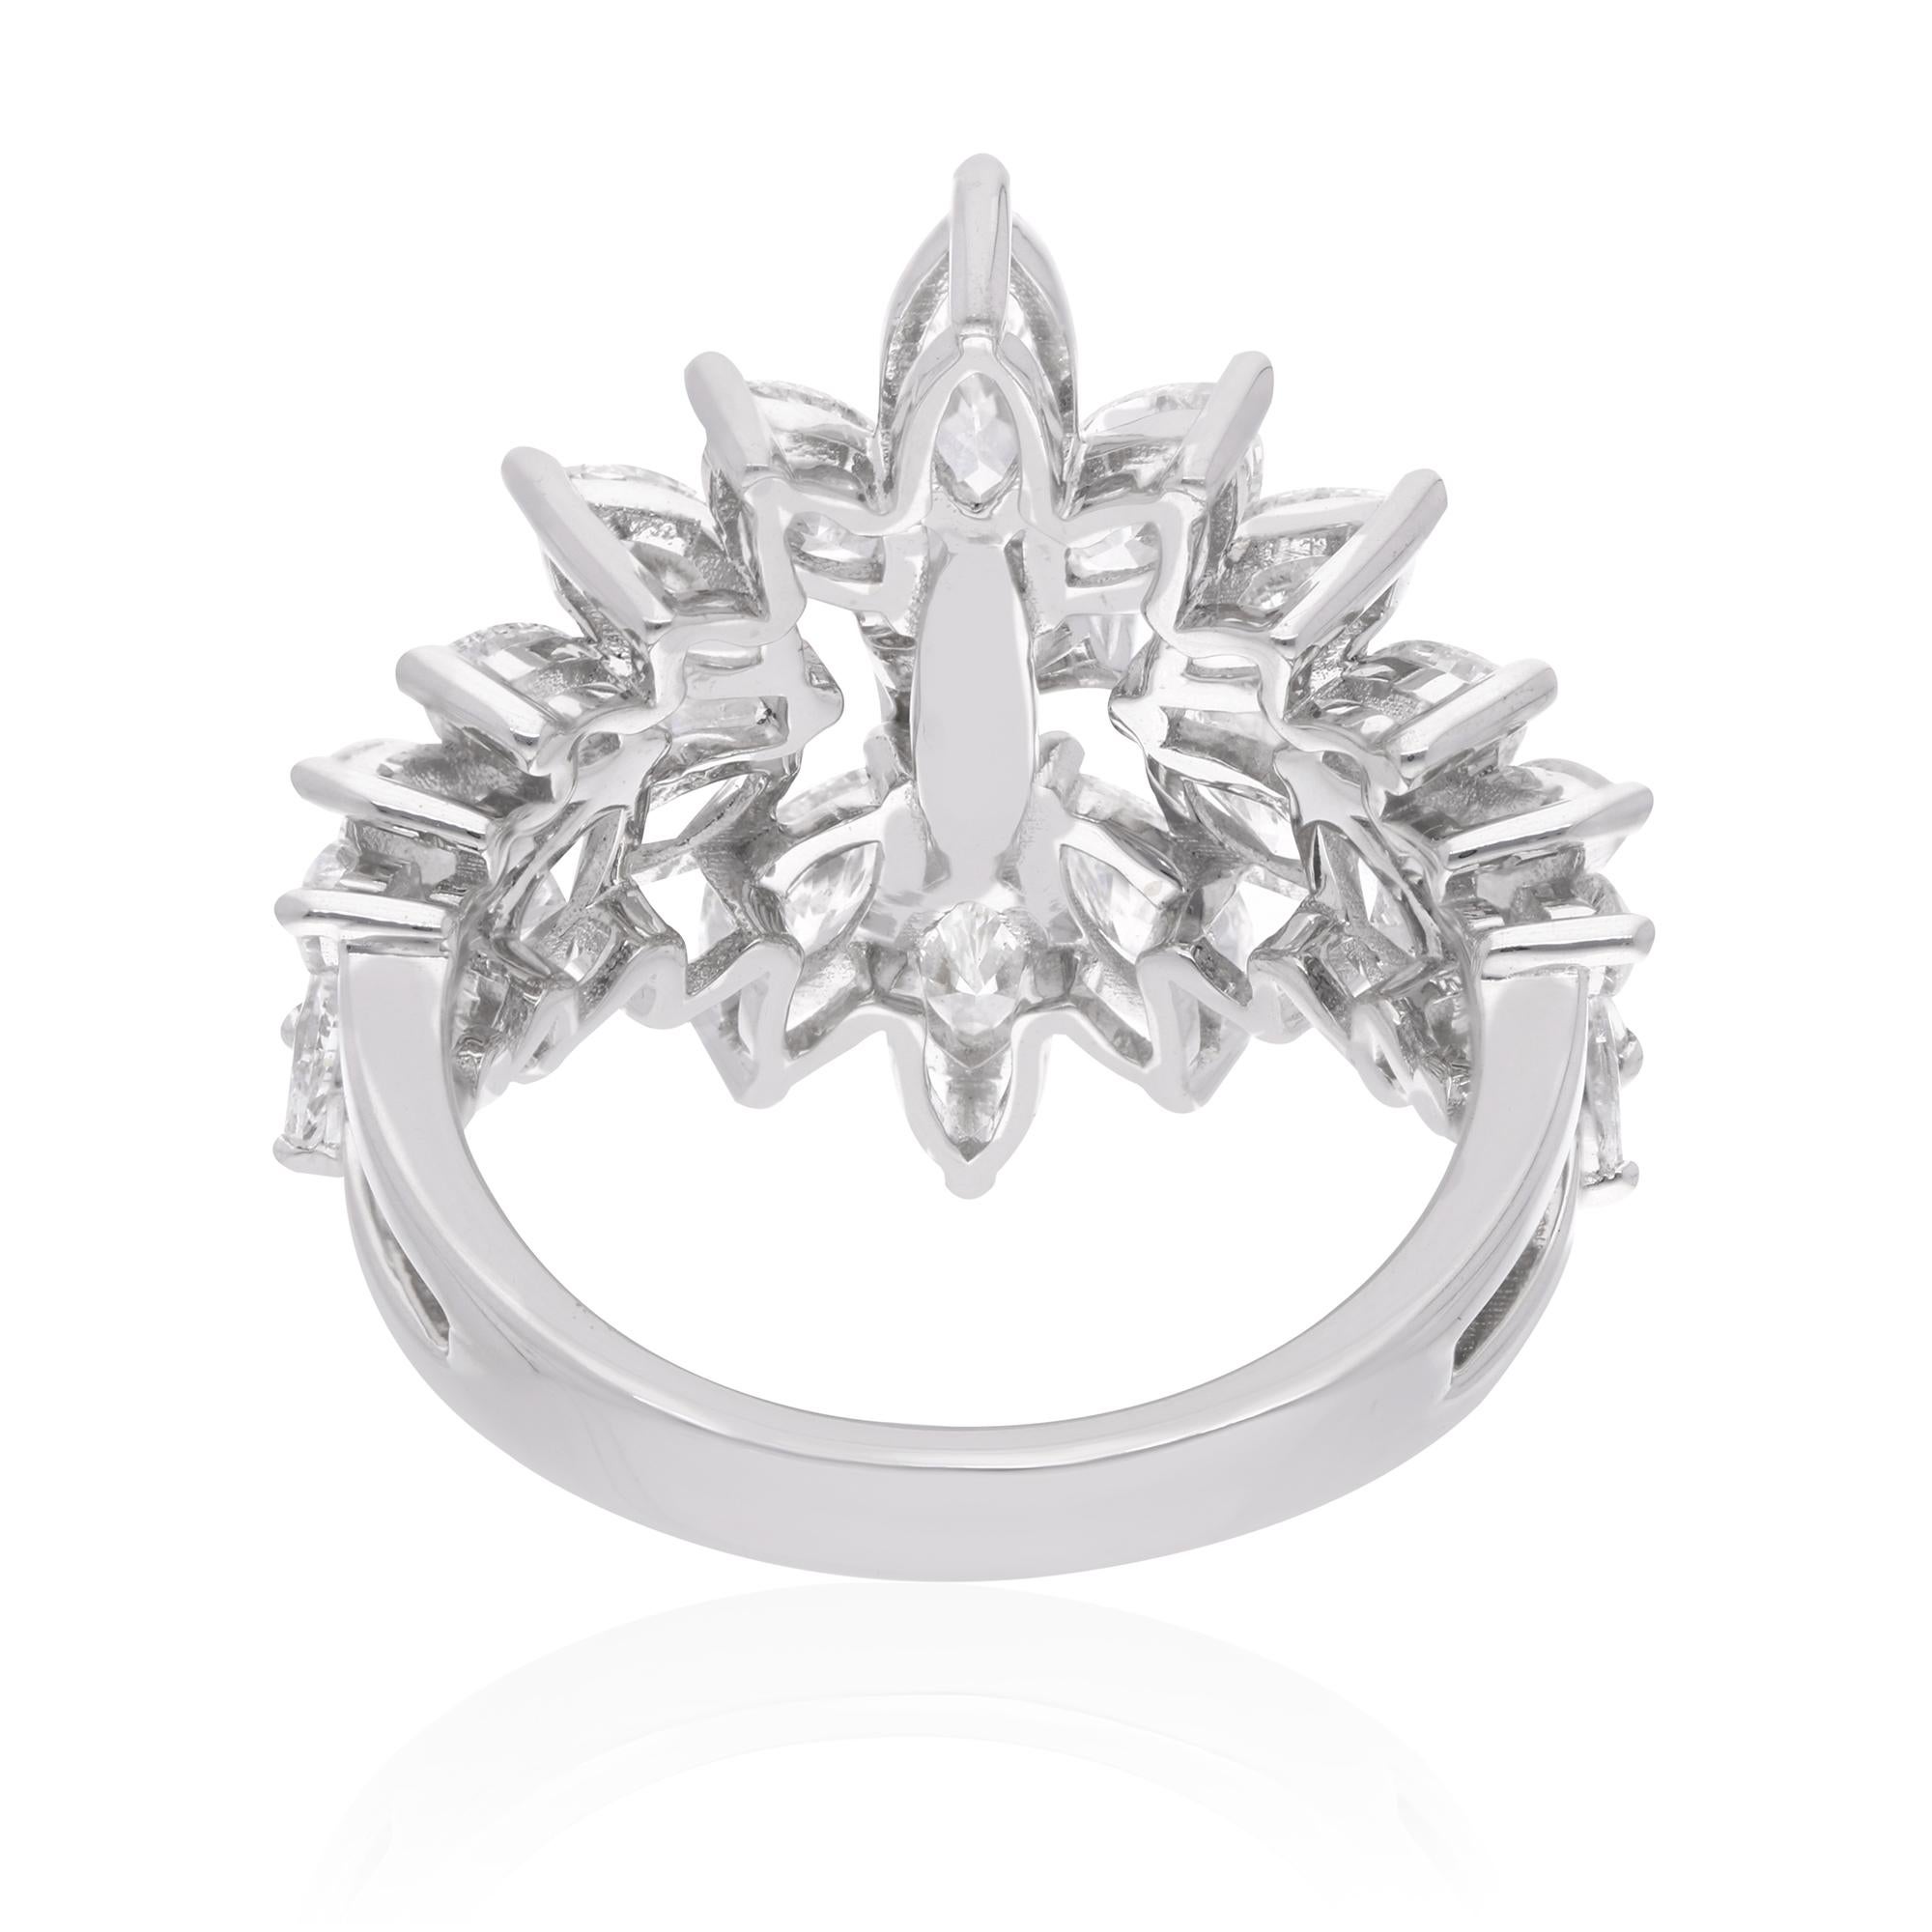 Every facet of this ring is designed to catch the light from every angle, creating a mesmerizing display of sparkle and radiance. The brilliance of the diamonds is further enhanced by the sleek and contemporary setting of 14 karat white gold, which